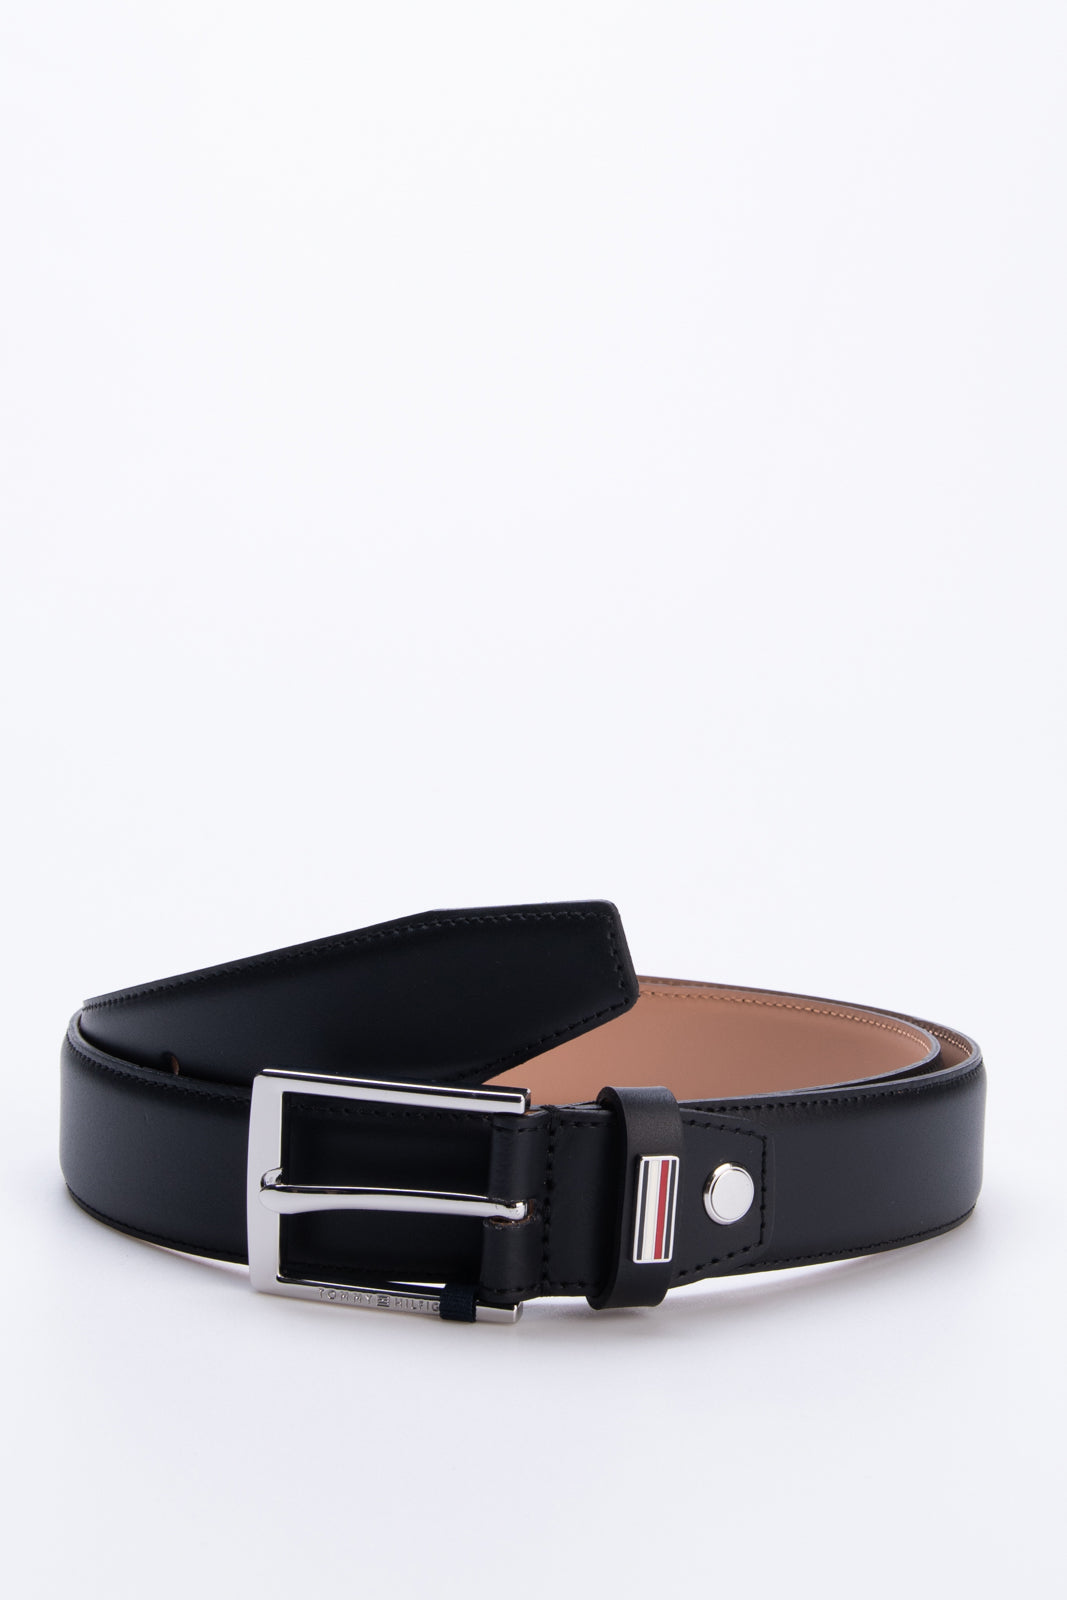 TOMMY HILFIGER Leather Belt Size 105/42 Adjustable Length Pin Buckle Closure gallery main photo